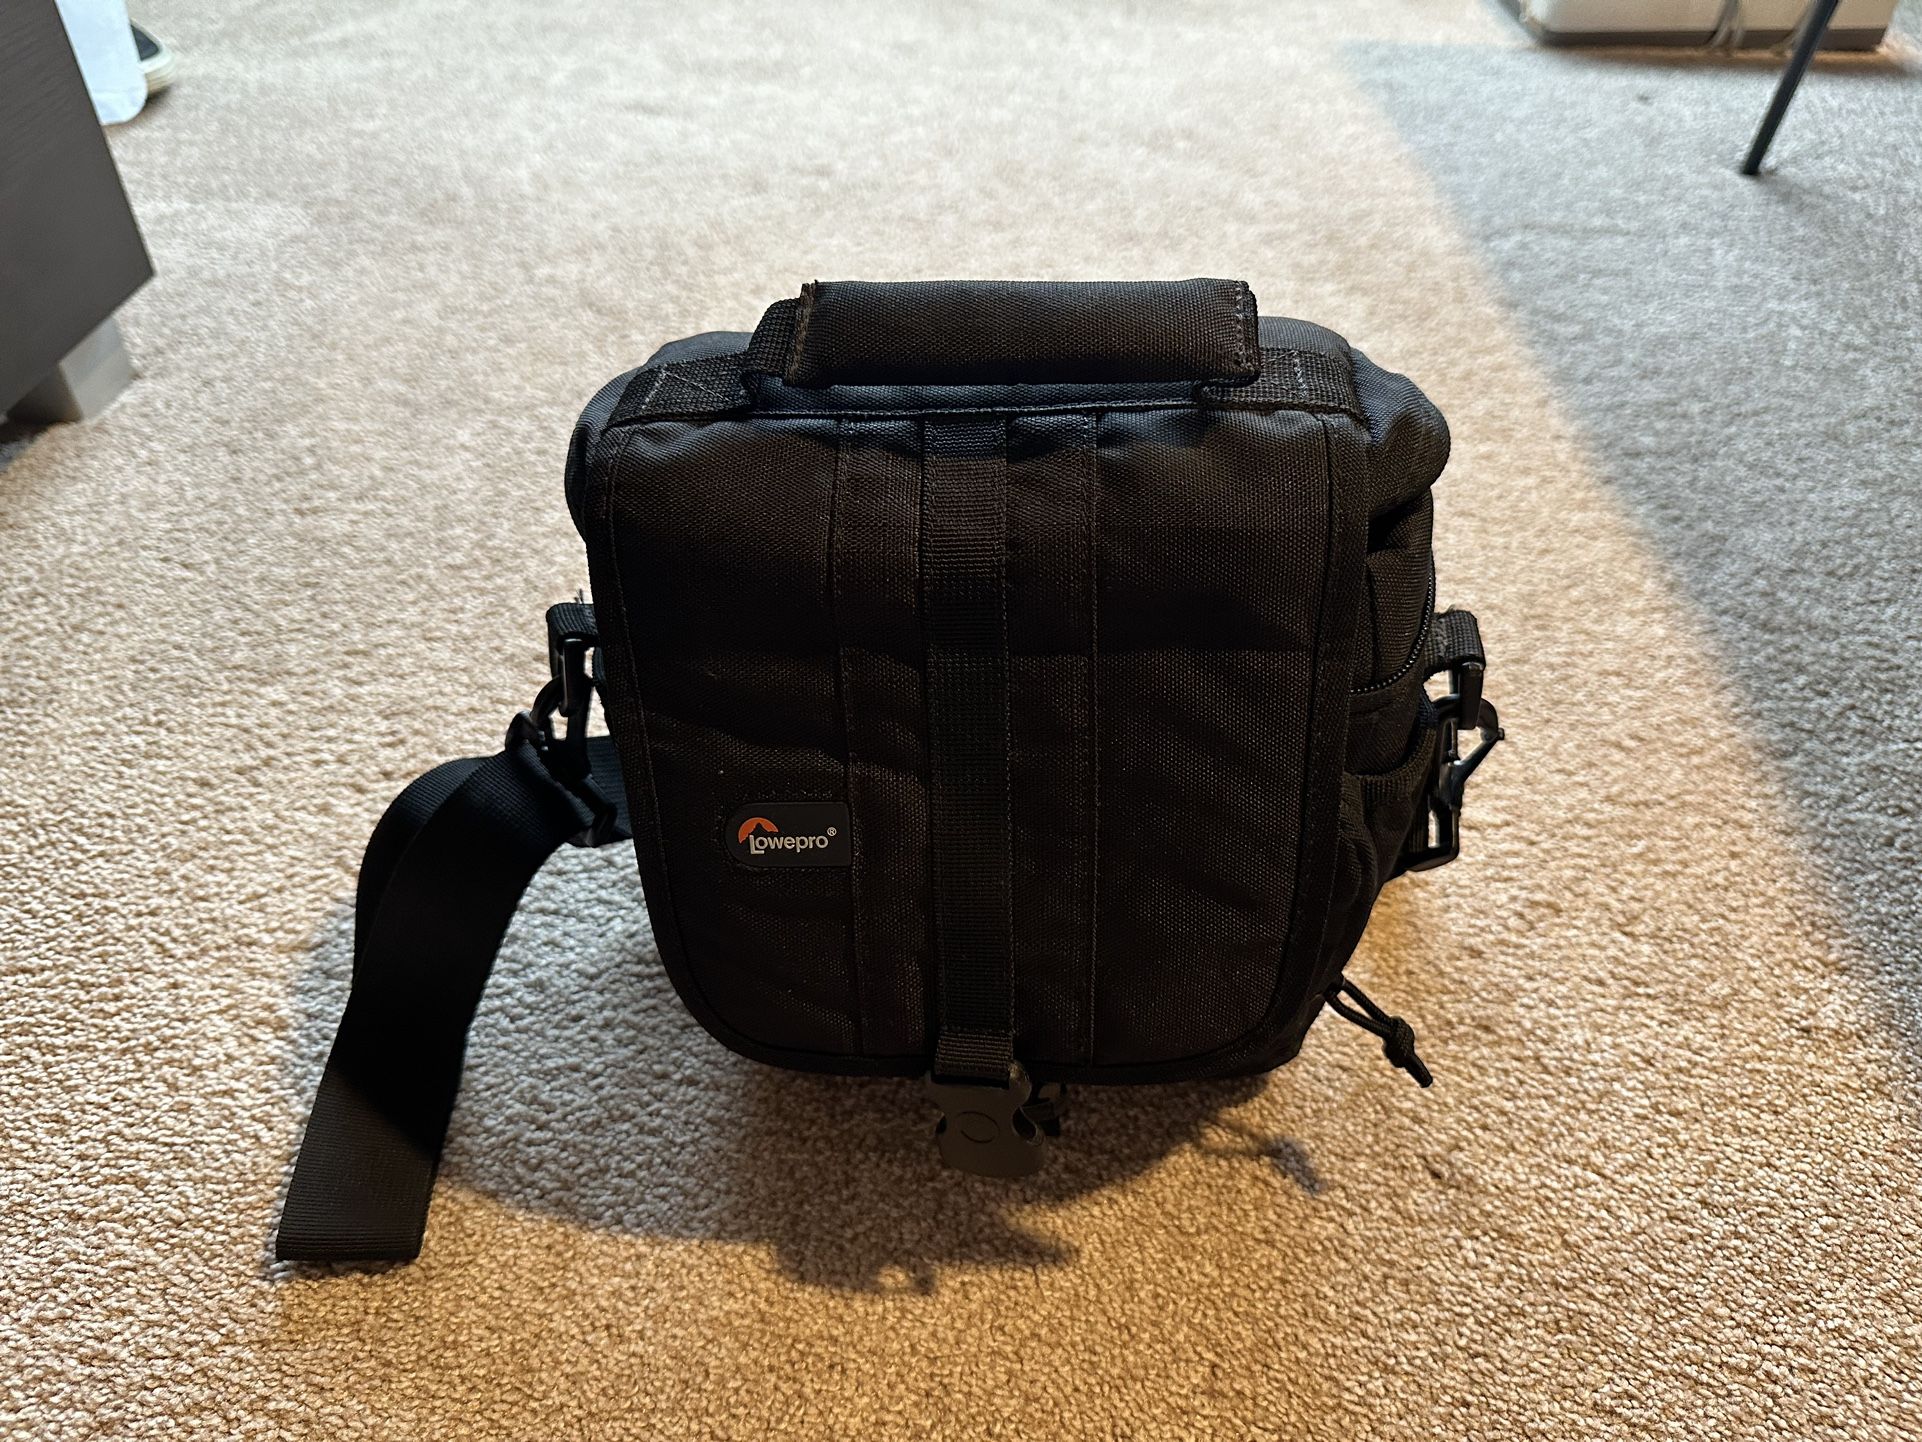 Lowepro Camera Carrying Bag - Compatible with DSLR Camera - Black